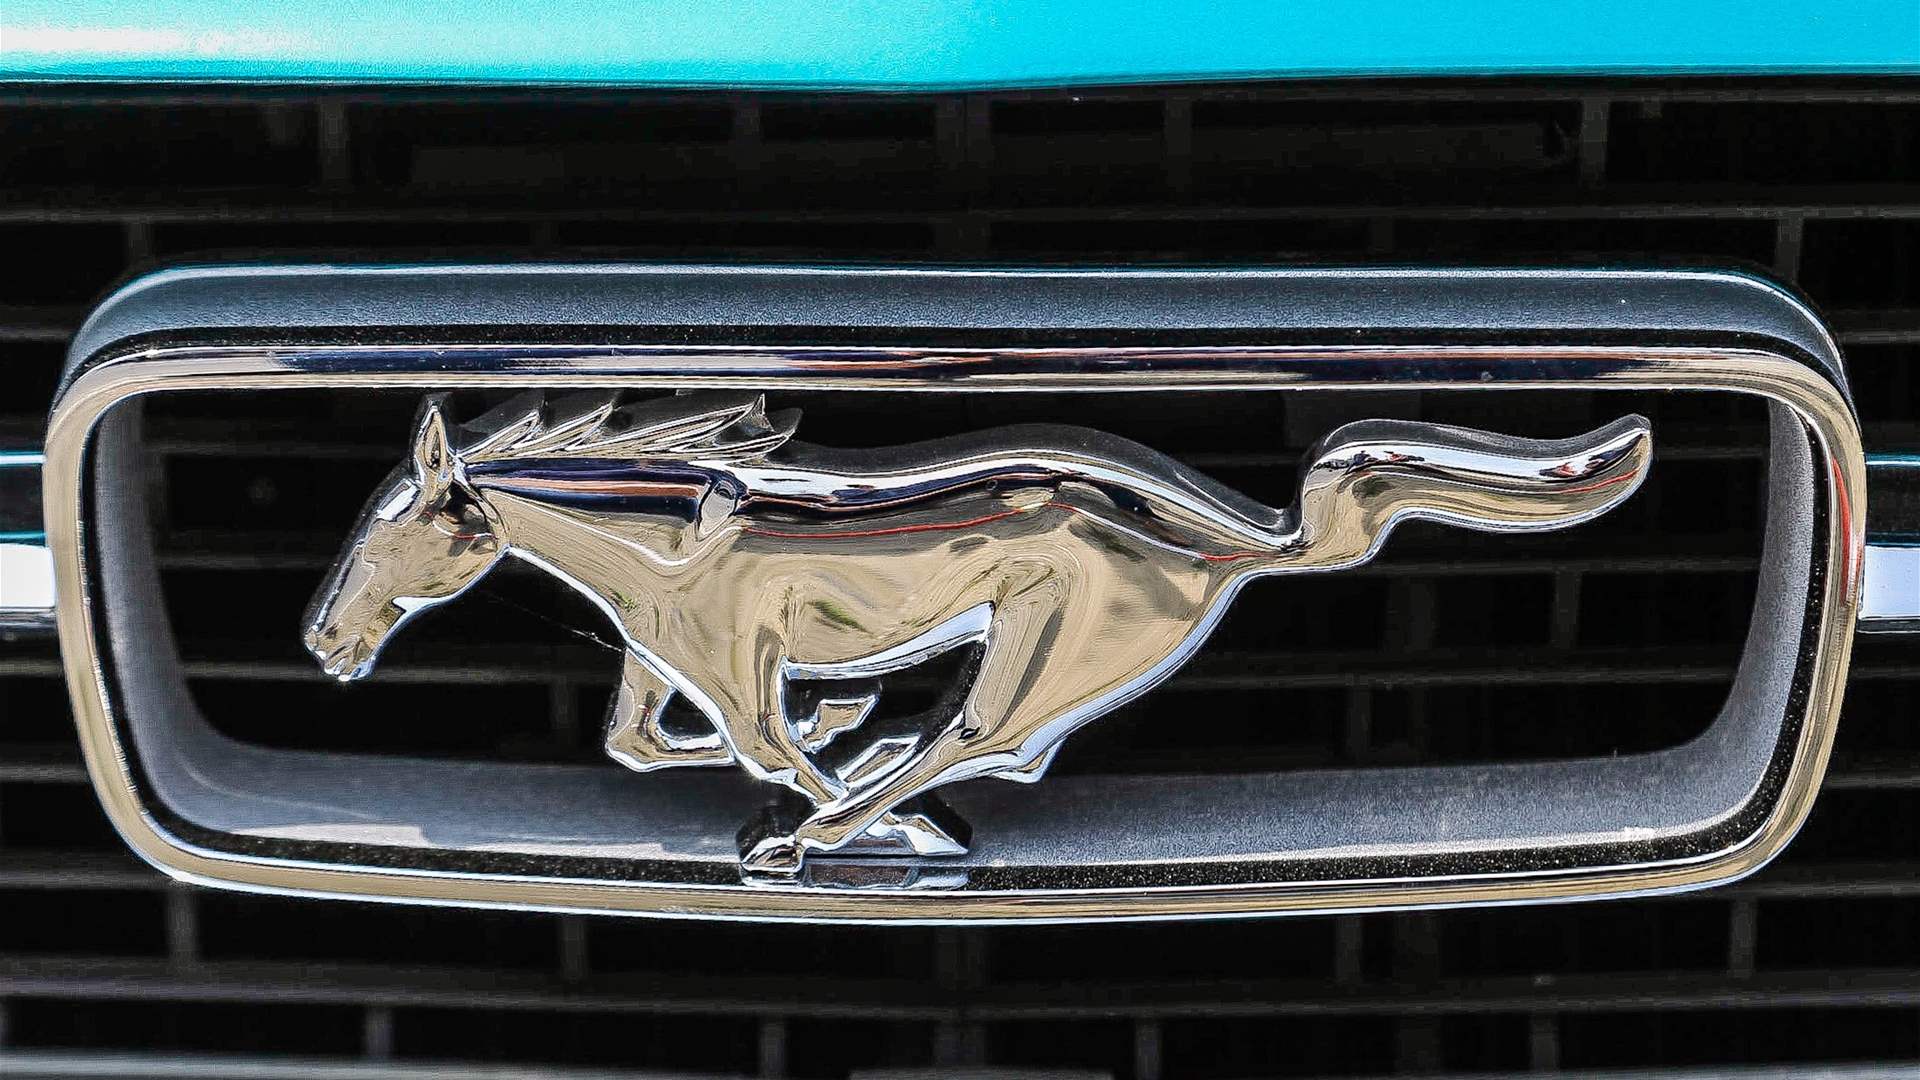 Ford discounts Mustang Mach-E electric SUVs in China